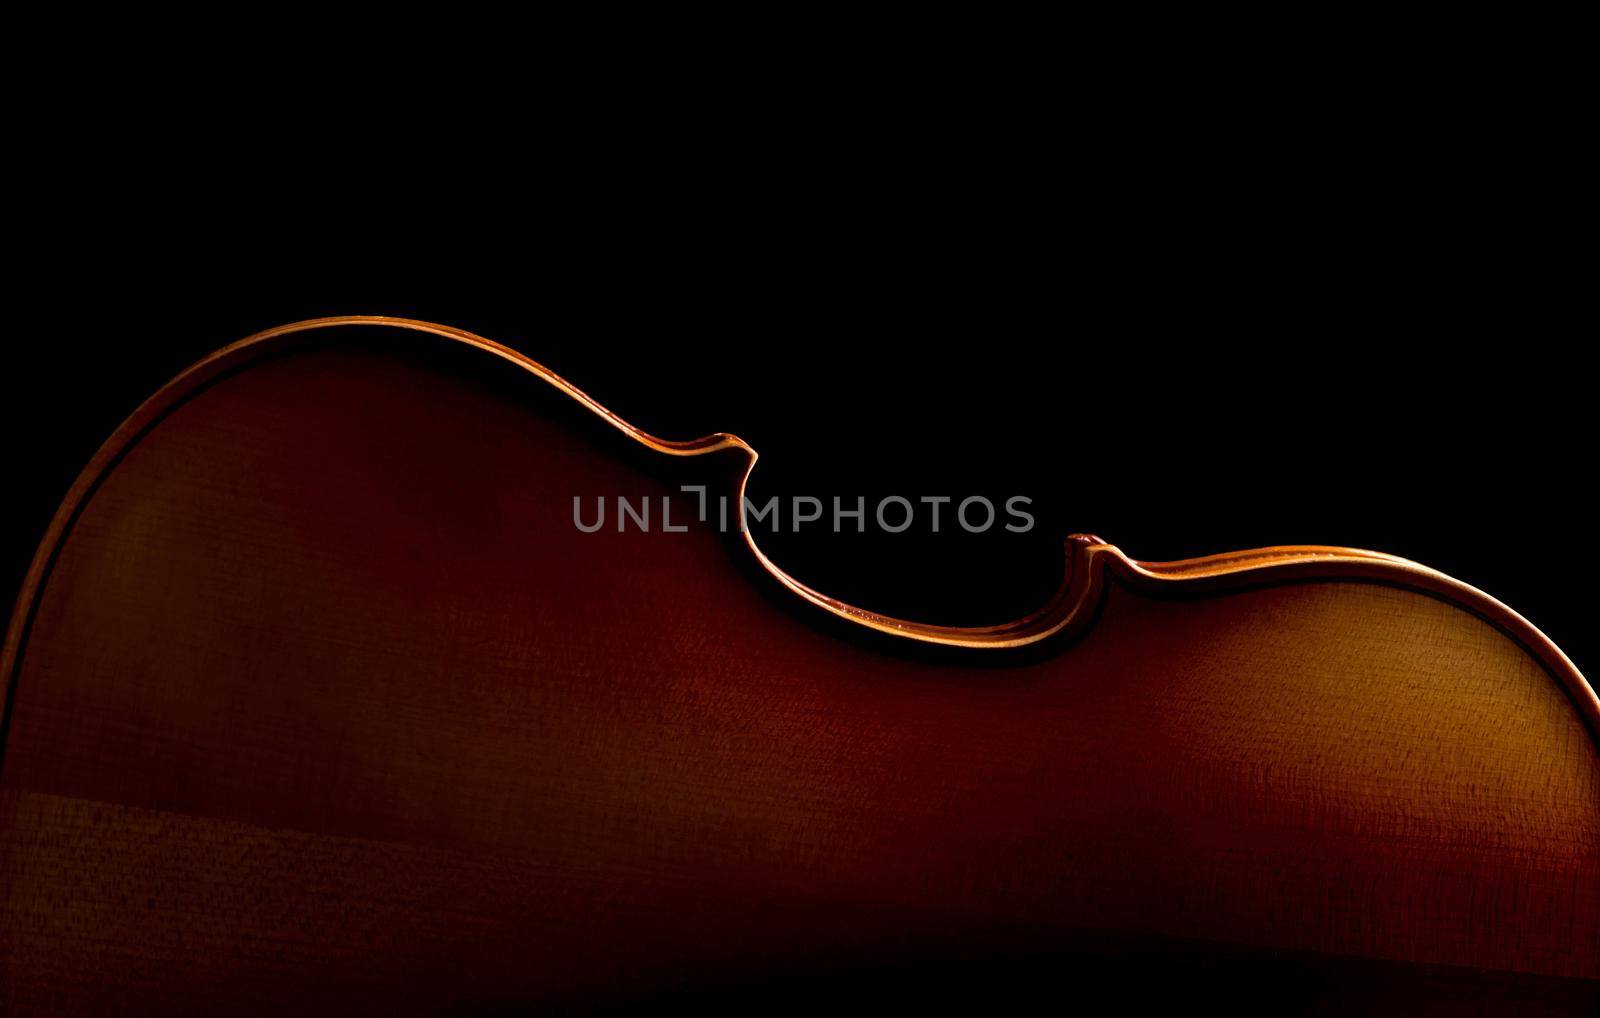 Violin music instrument of orchestra closeup isolated on black